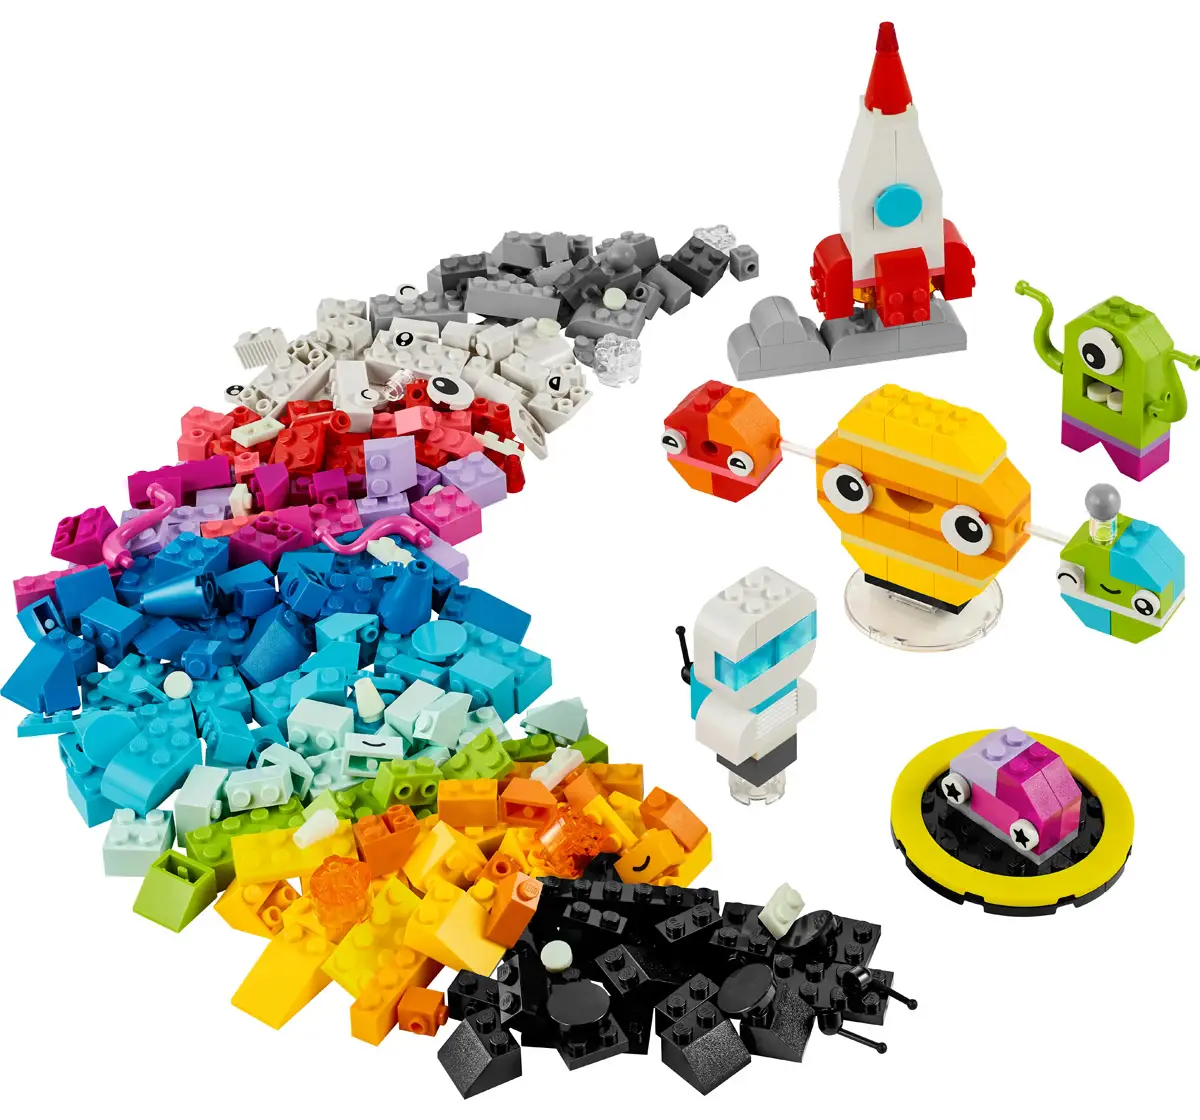 Lego Classic Creative Space Planets Kit 11037 Multicolour For Kids Ages 5Y+ (450 Pieces) 